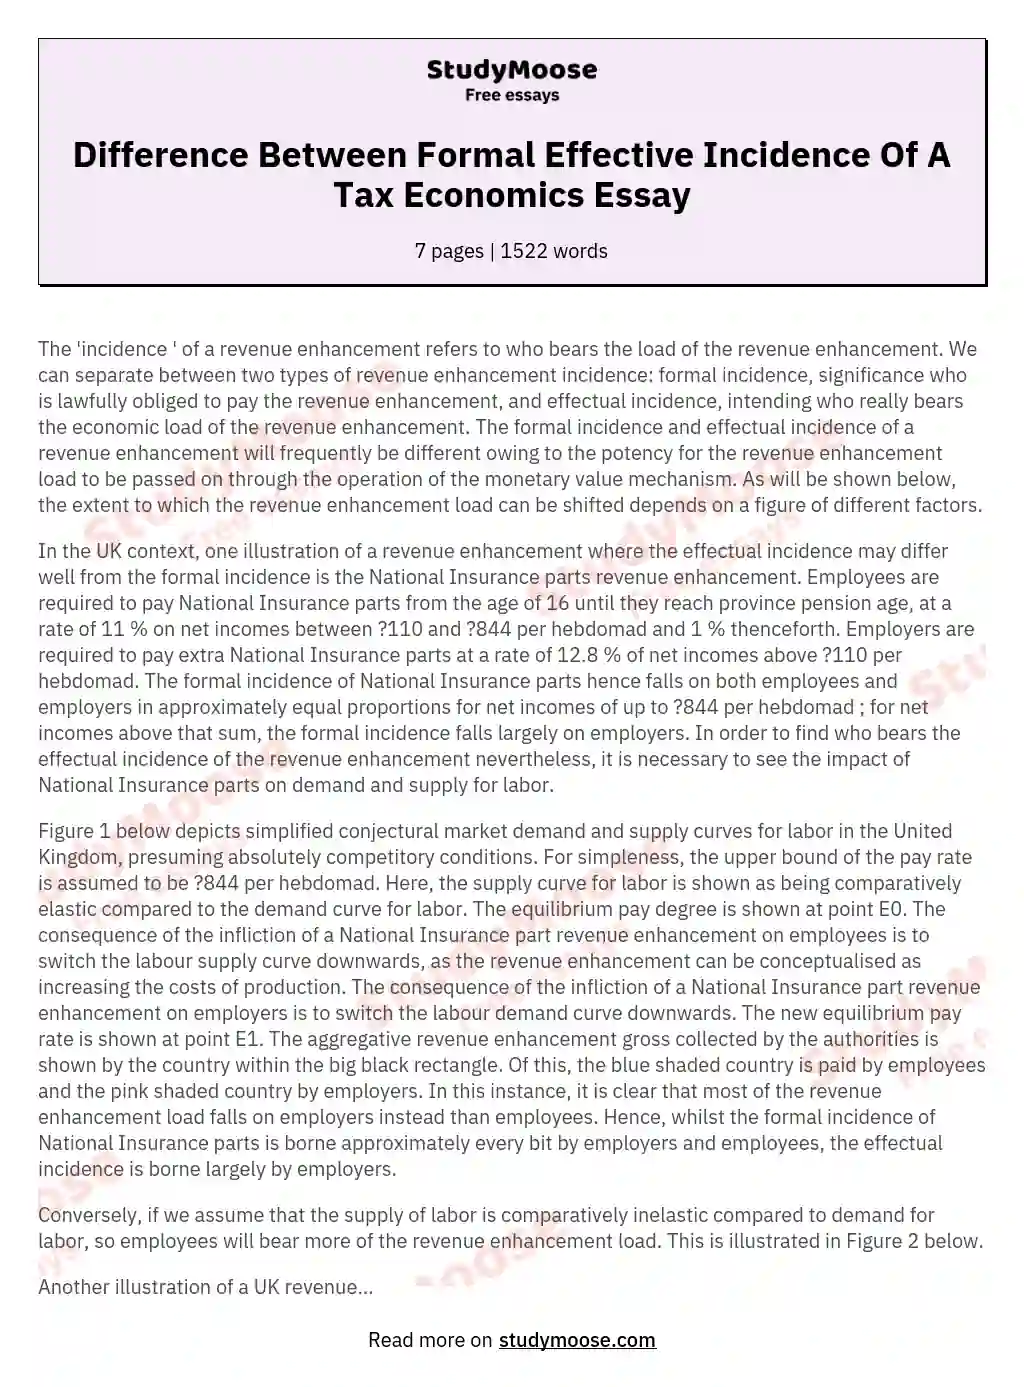 Difference Between Formal Effective Incidence Of A Tax Economics Essay essay